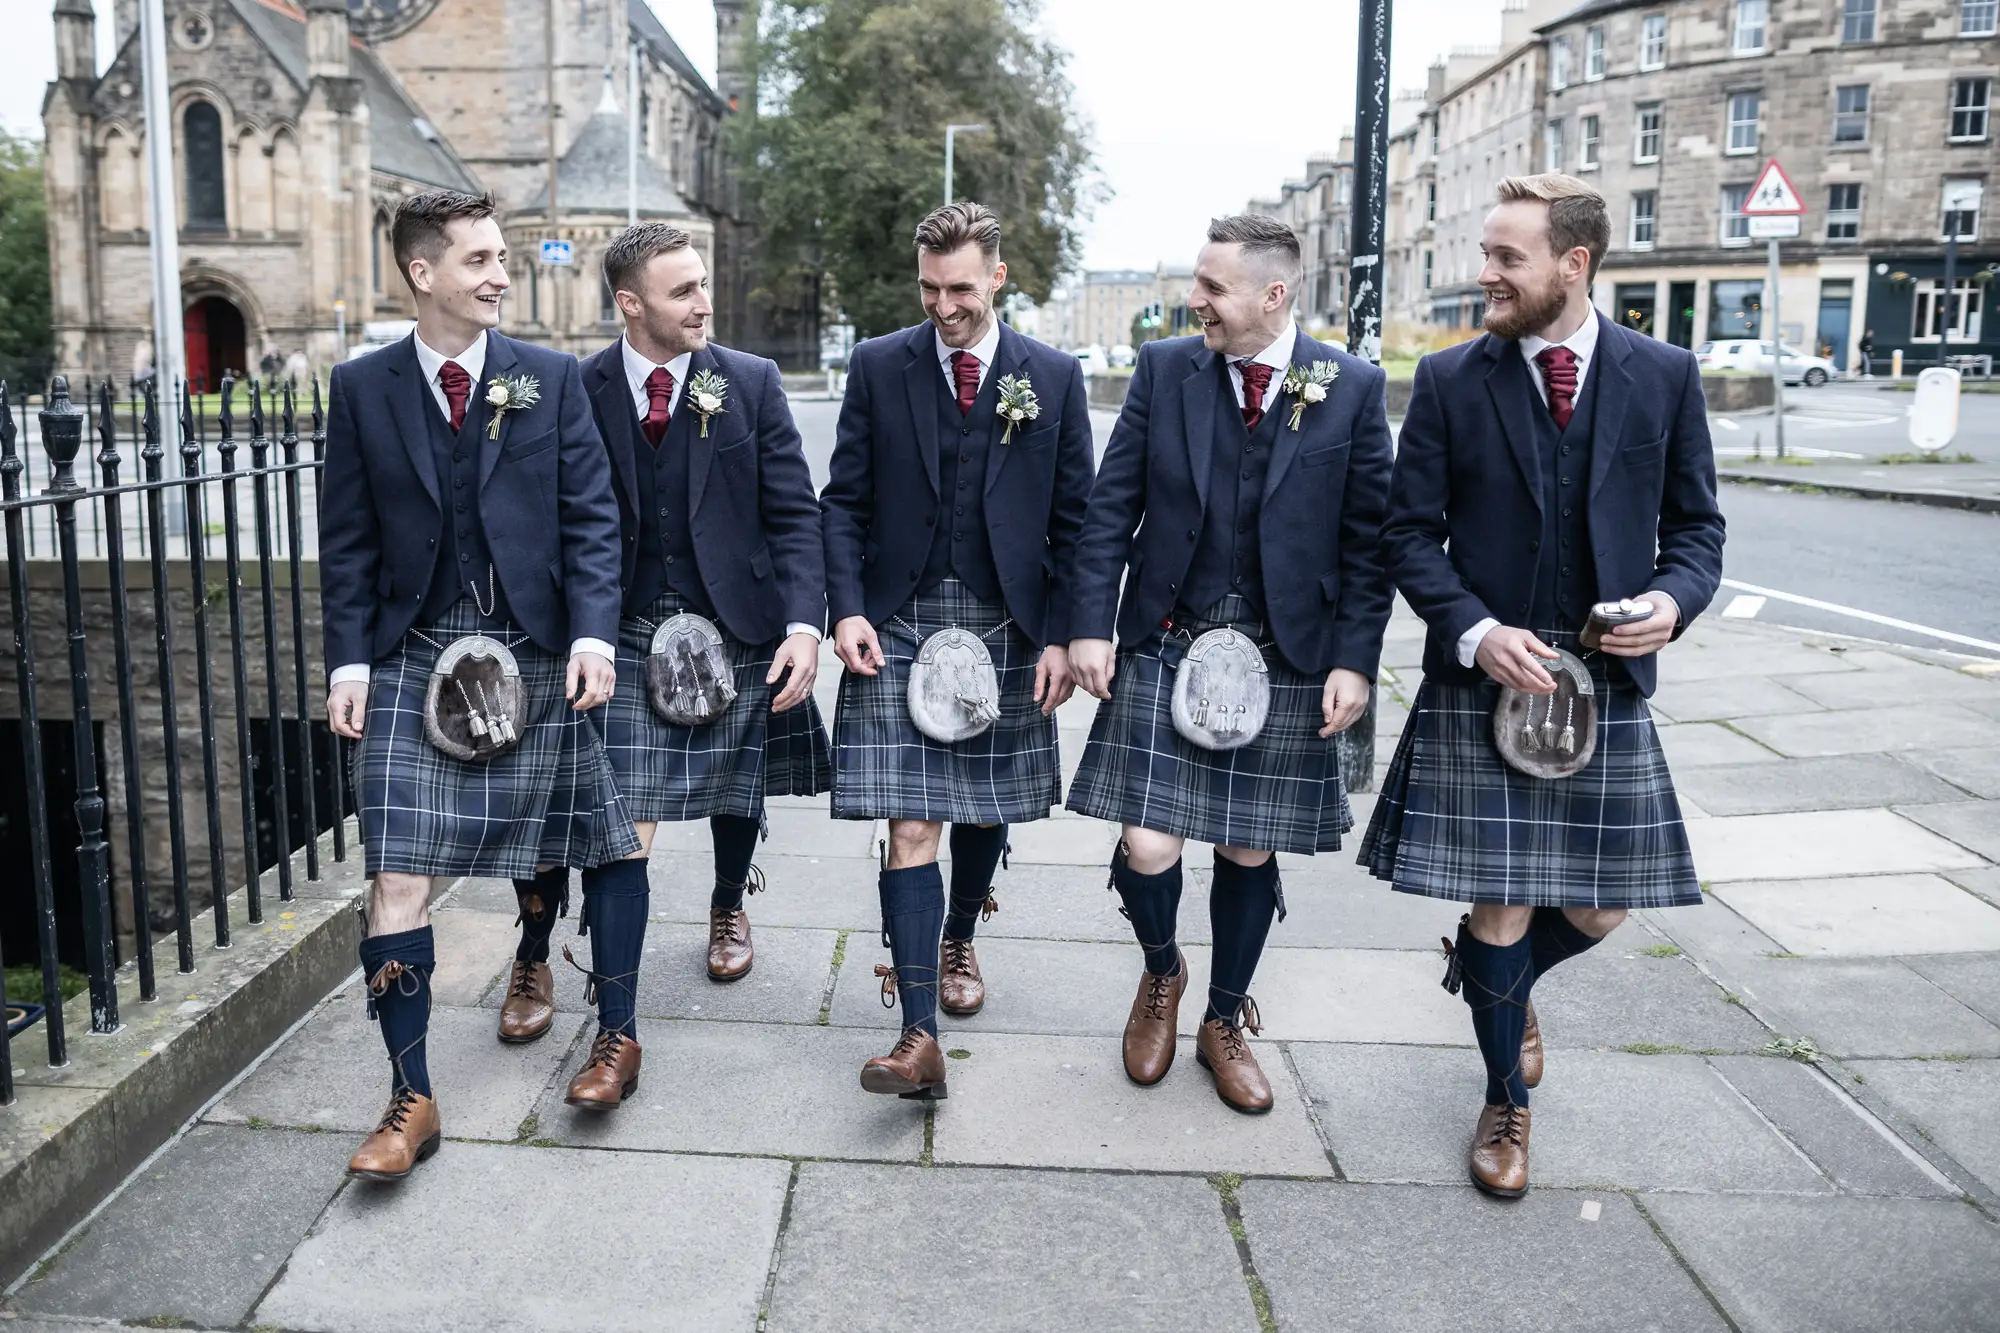 Five men in traditional scottish attire with kilts and sporrans walking and laughing together on a city street.